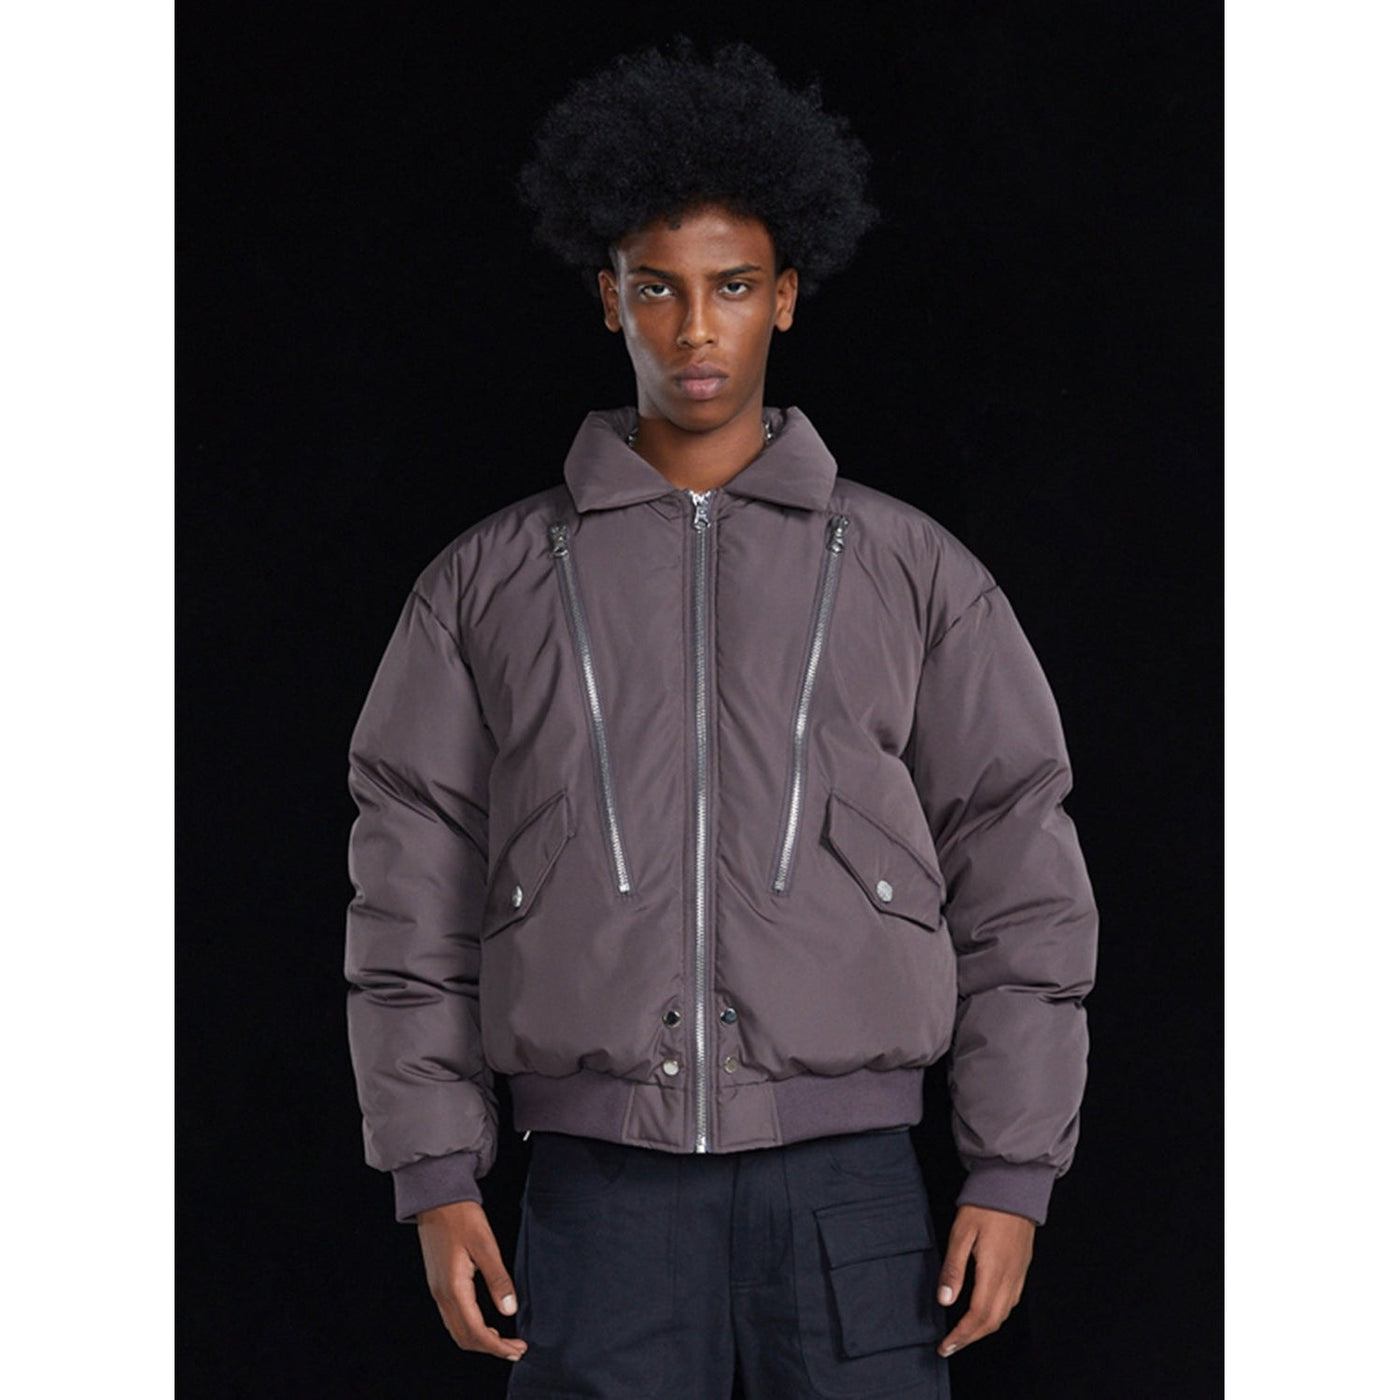 R69 Three Zippers Puffer Jacket Korean Street Fashion Jacket By R69 Shop Online at OH Vault